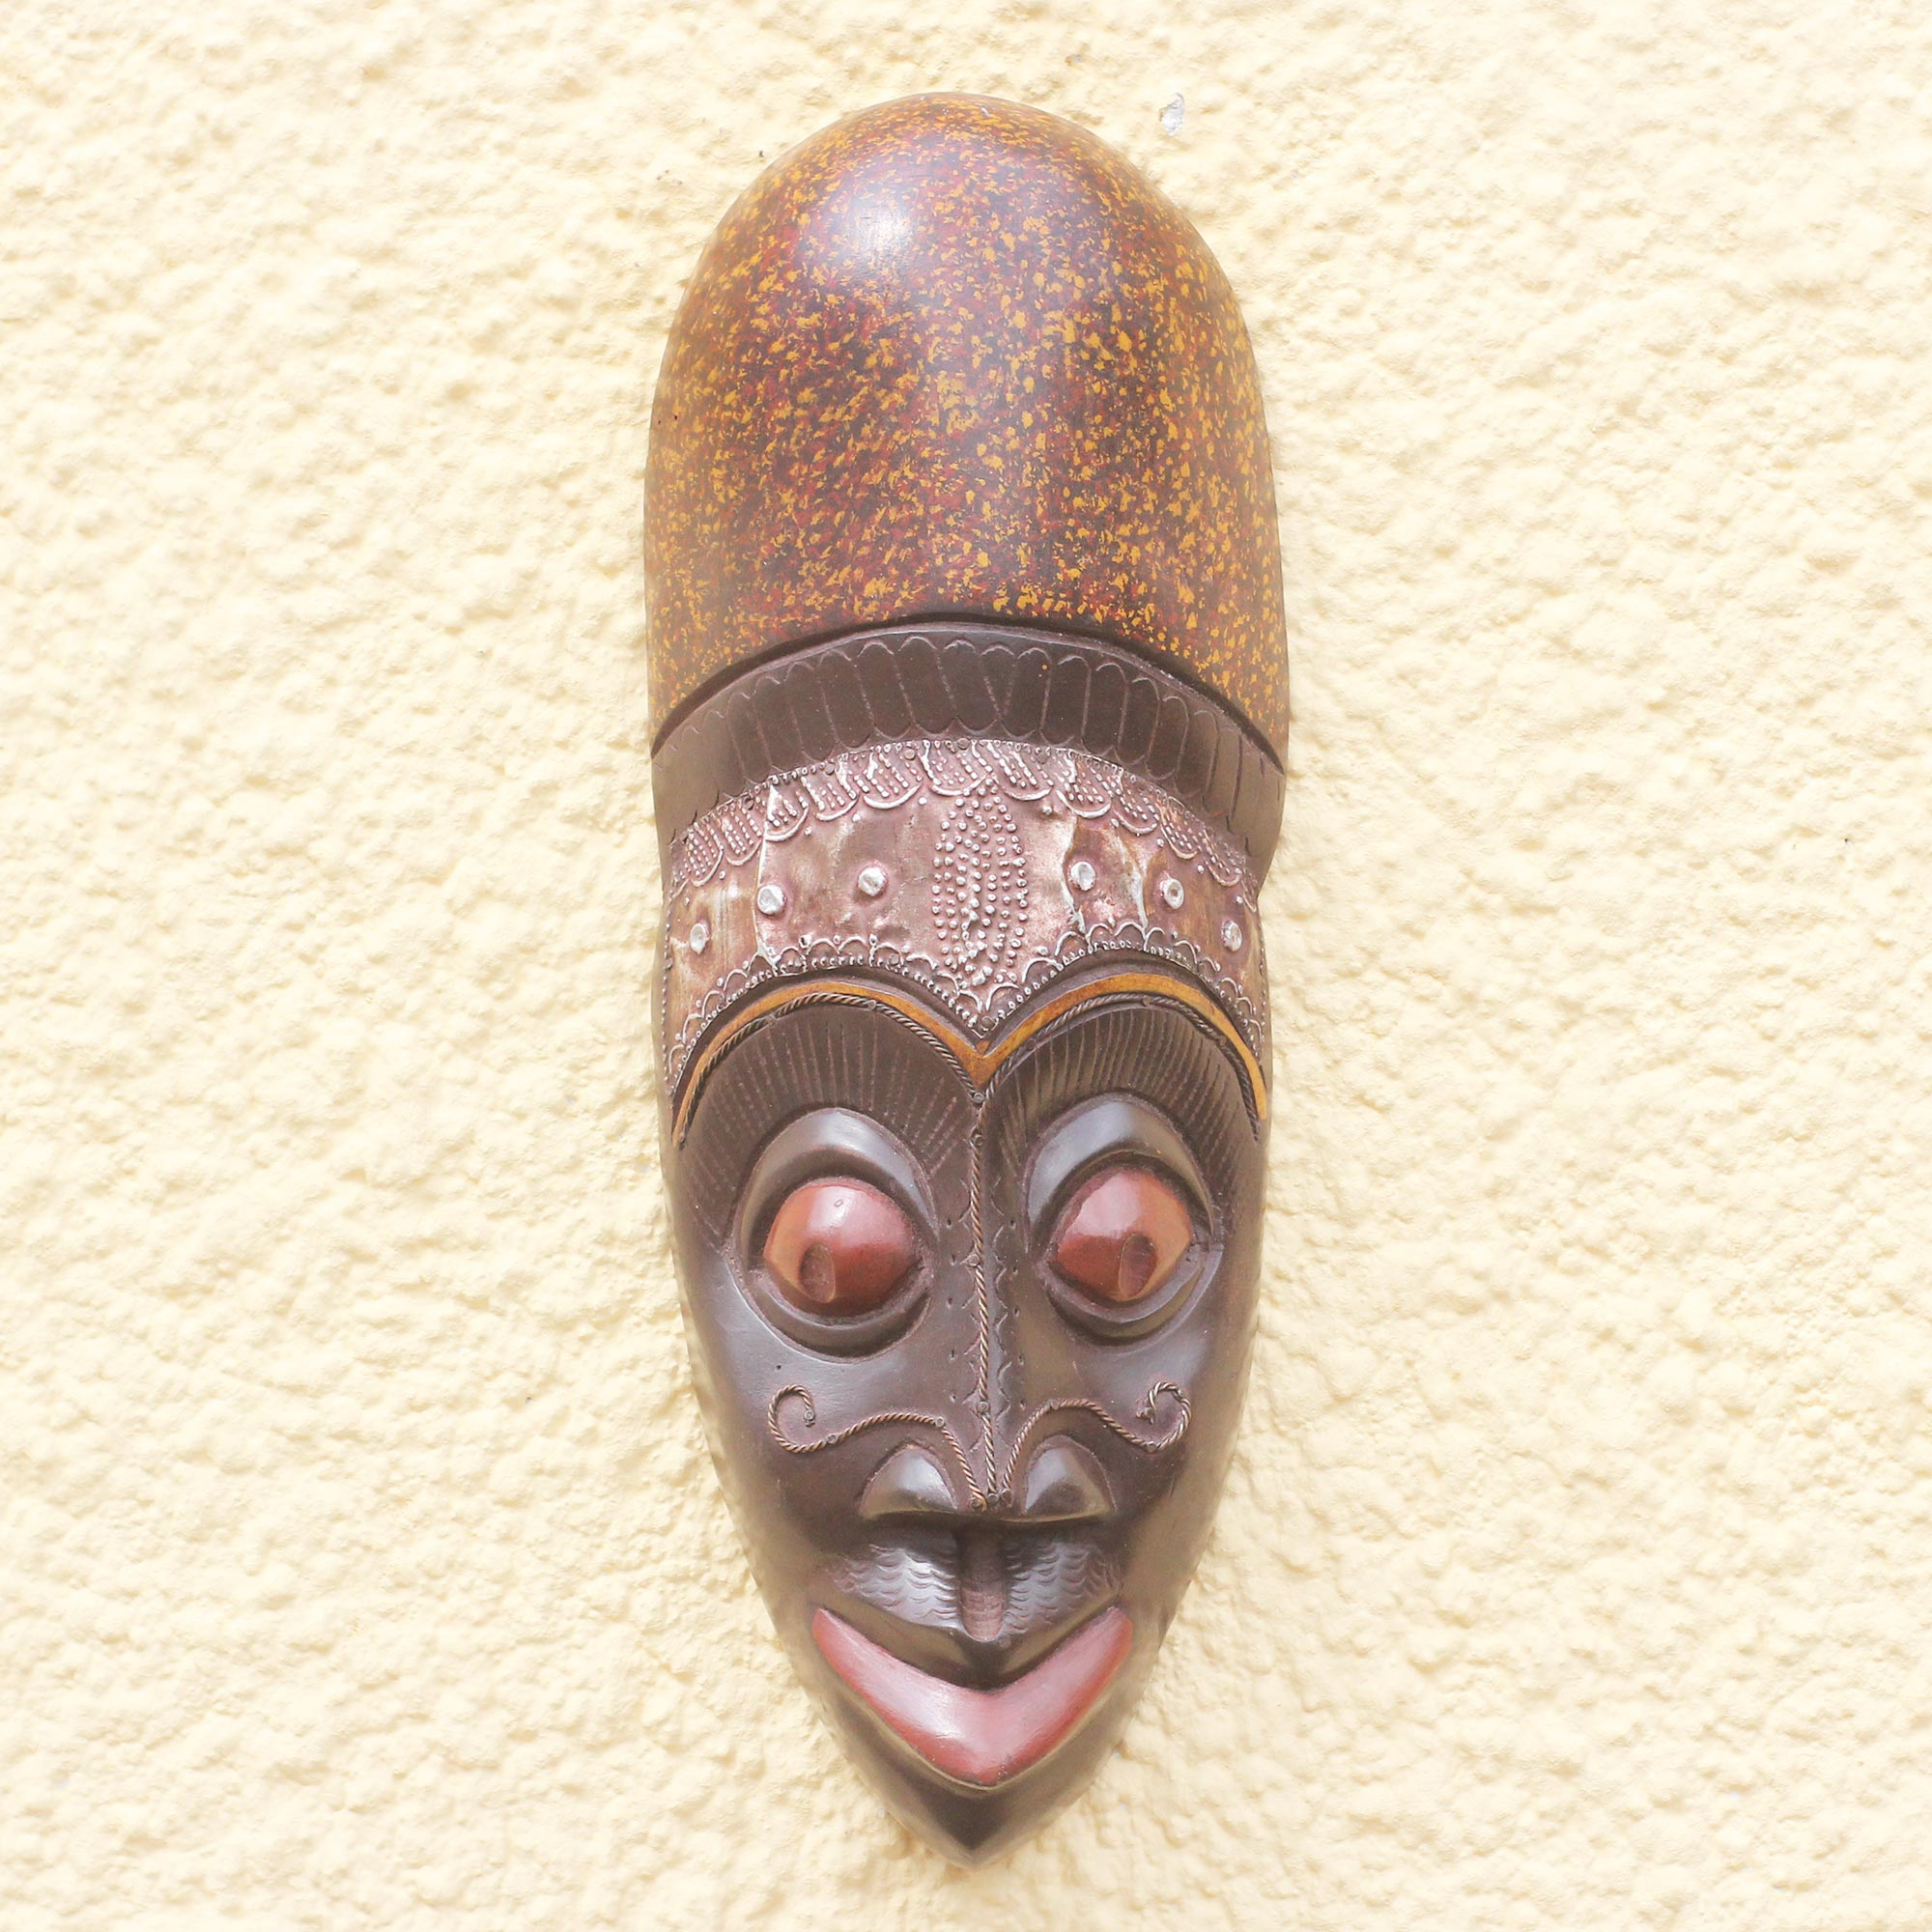 Artistic Unique African Sese Wood Mask from Ghana - Happy Africa | NOVICA